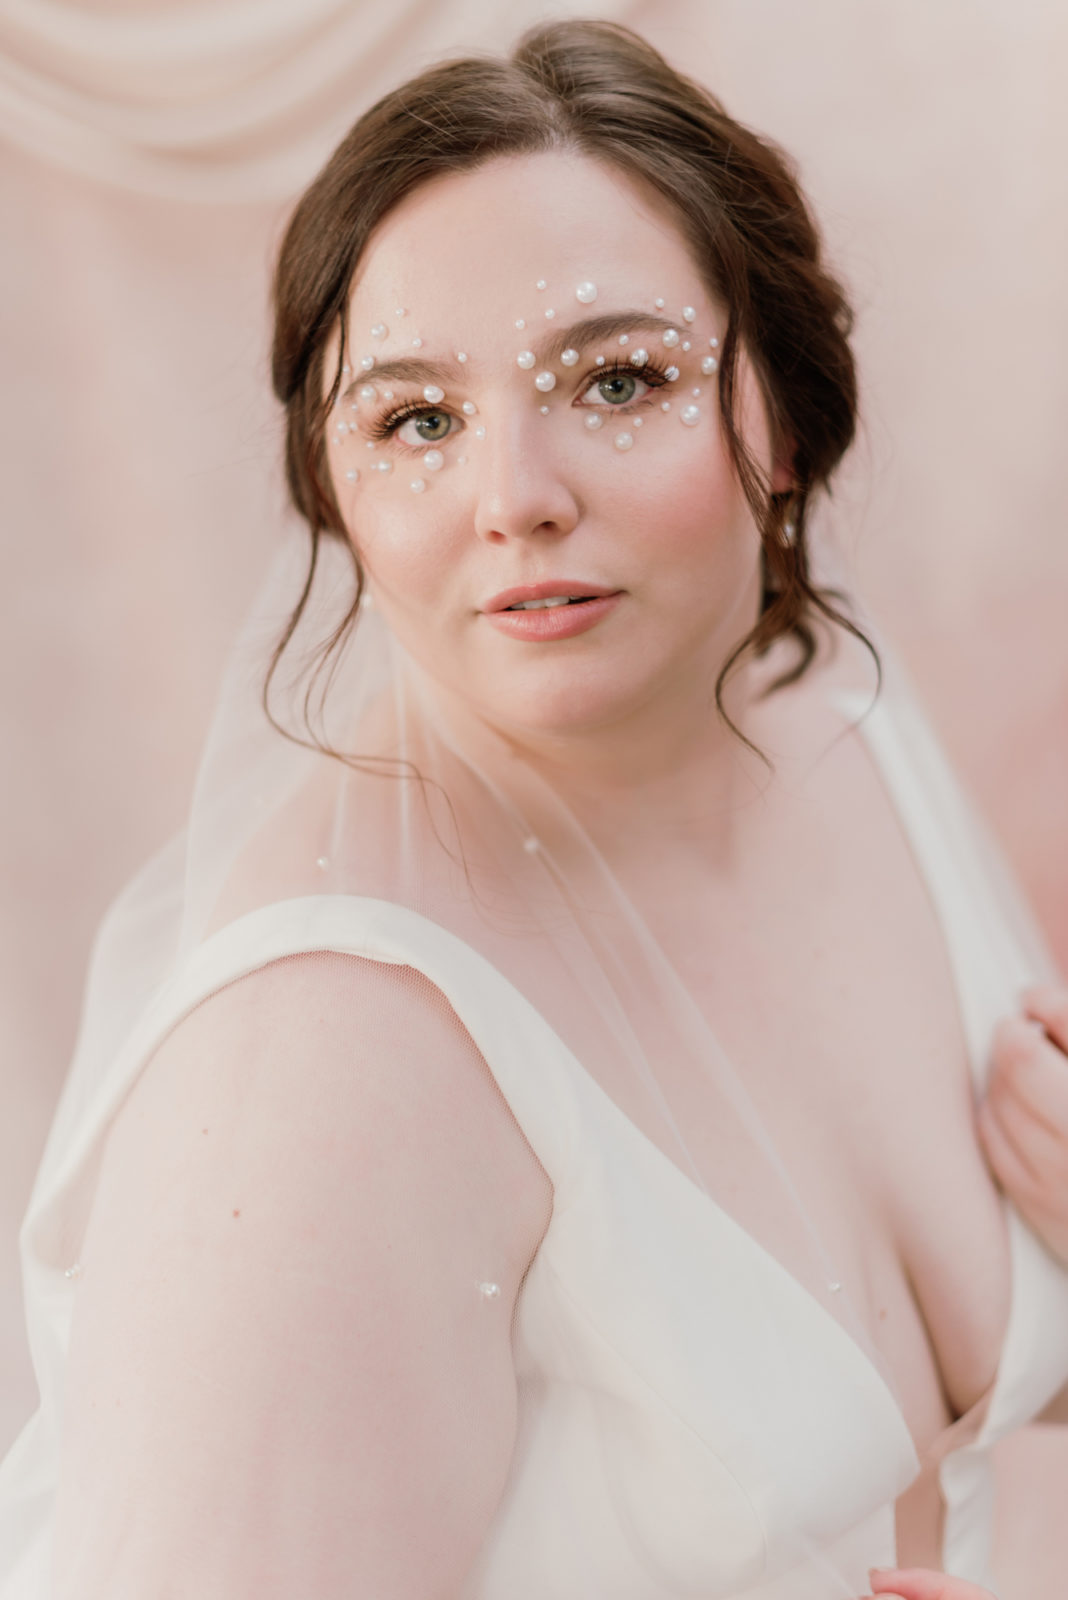 Model with romantic pearl studded eye makeup poses in the Selcouth wedding gown by Aesling